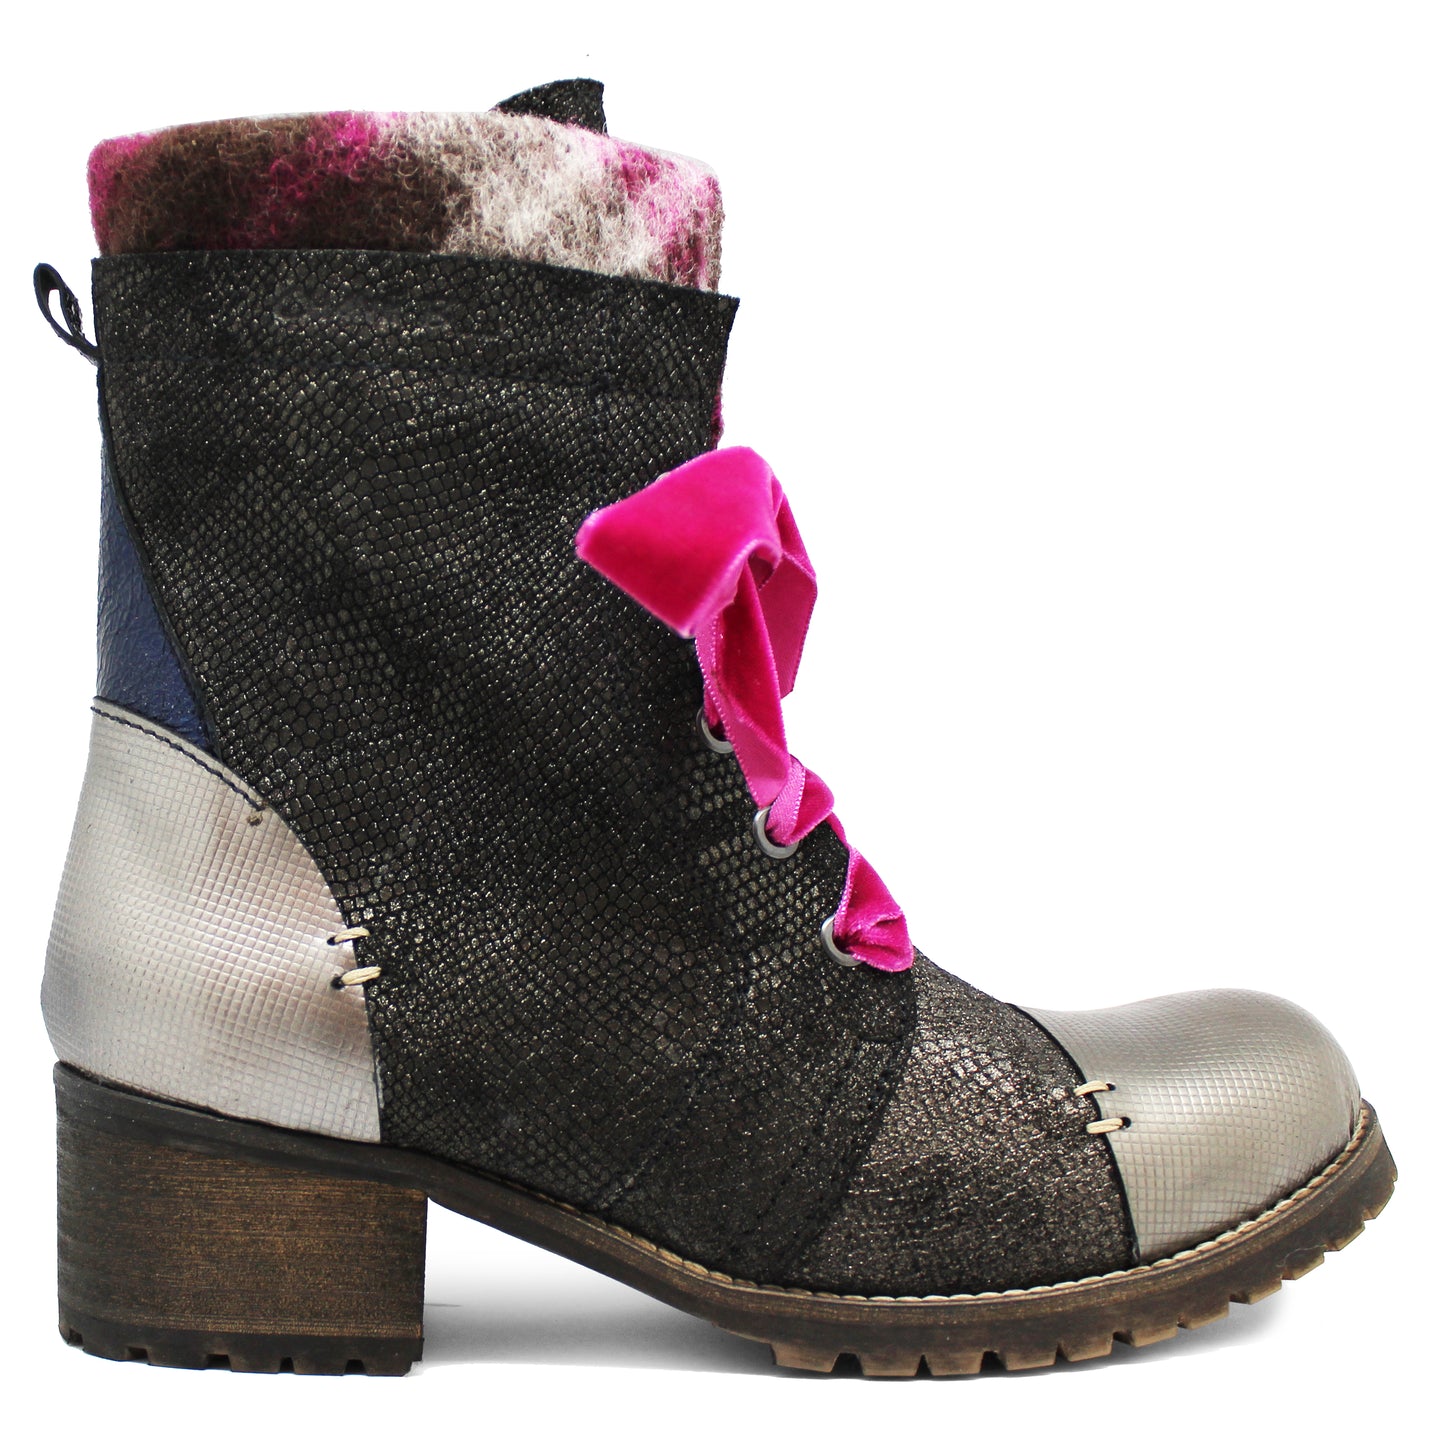 Grouse-Ling - Pewter lace up boot